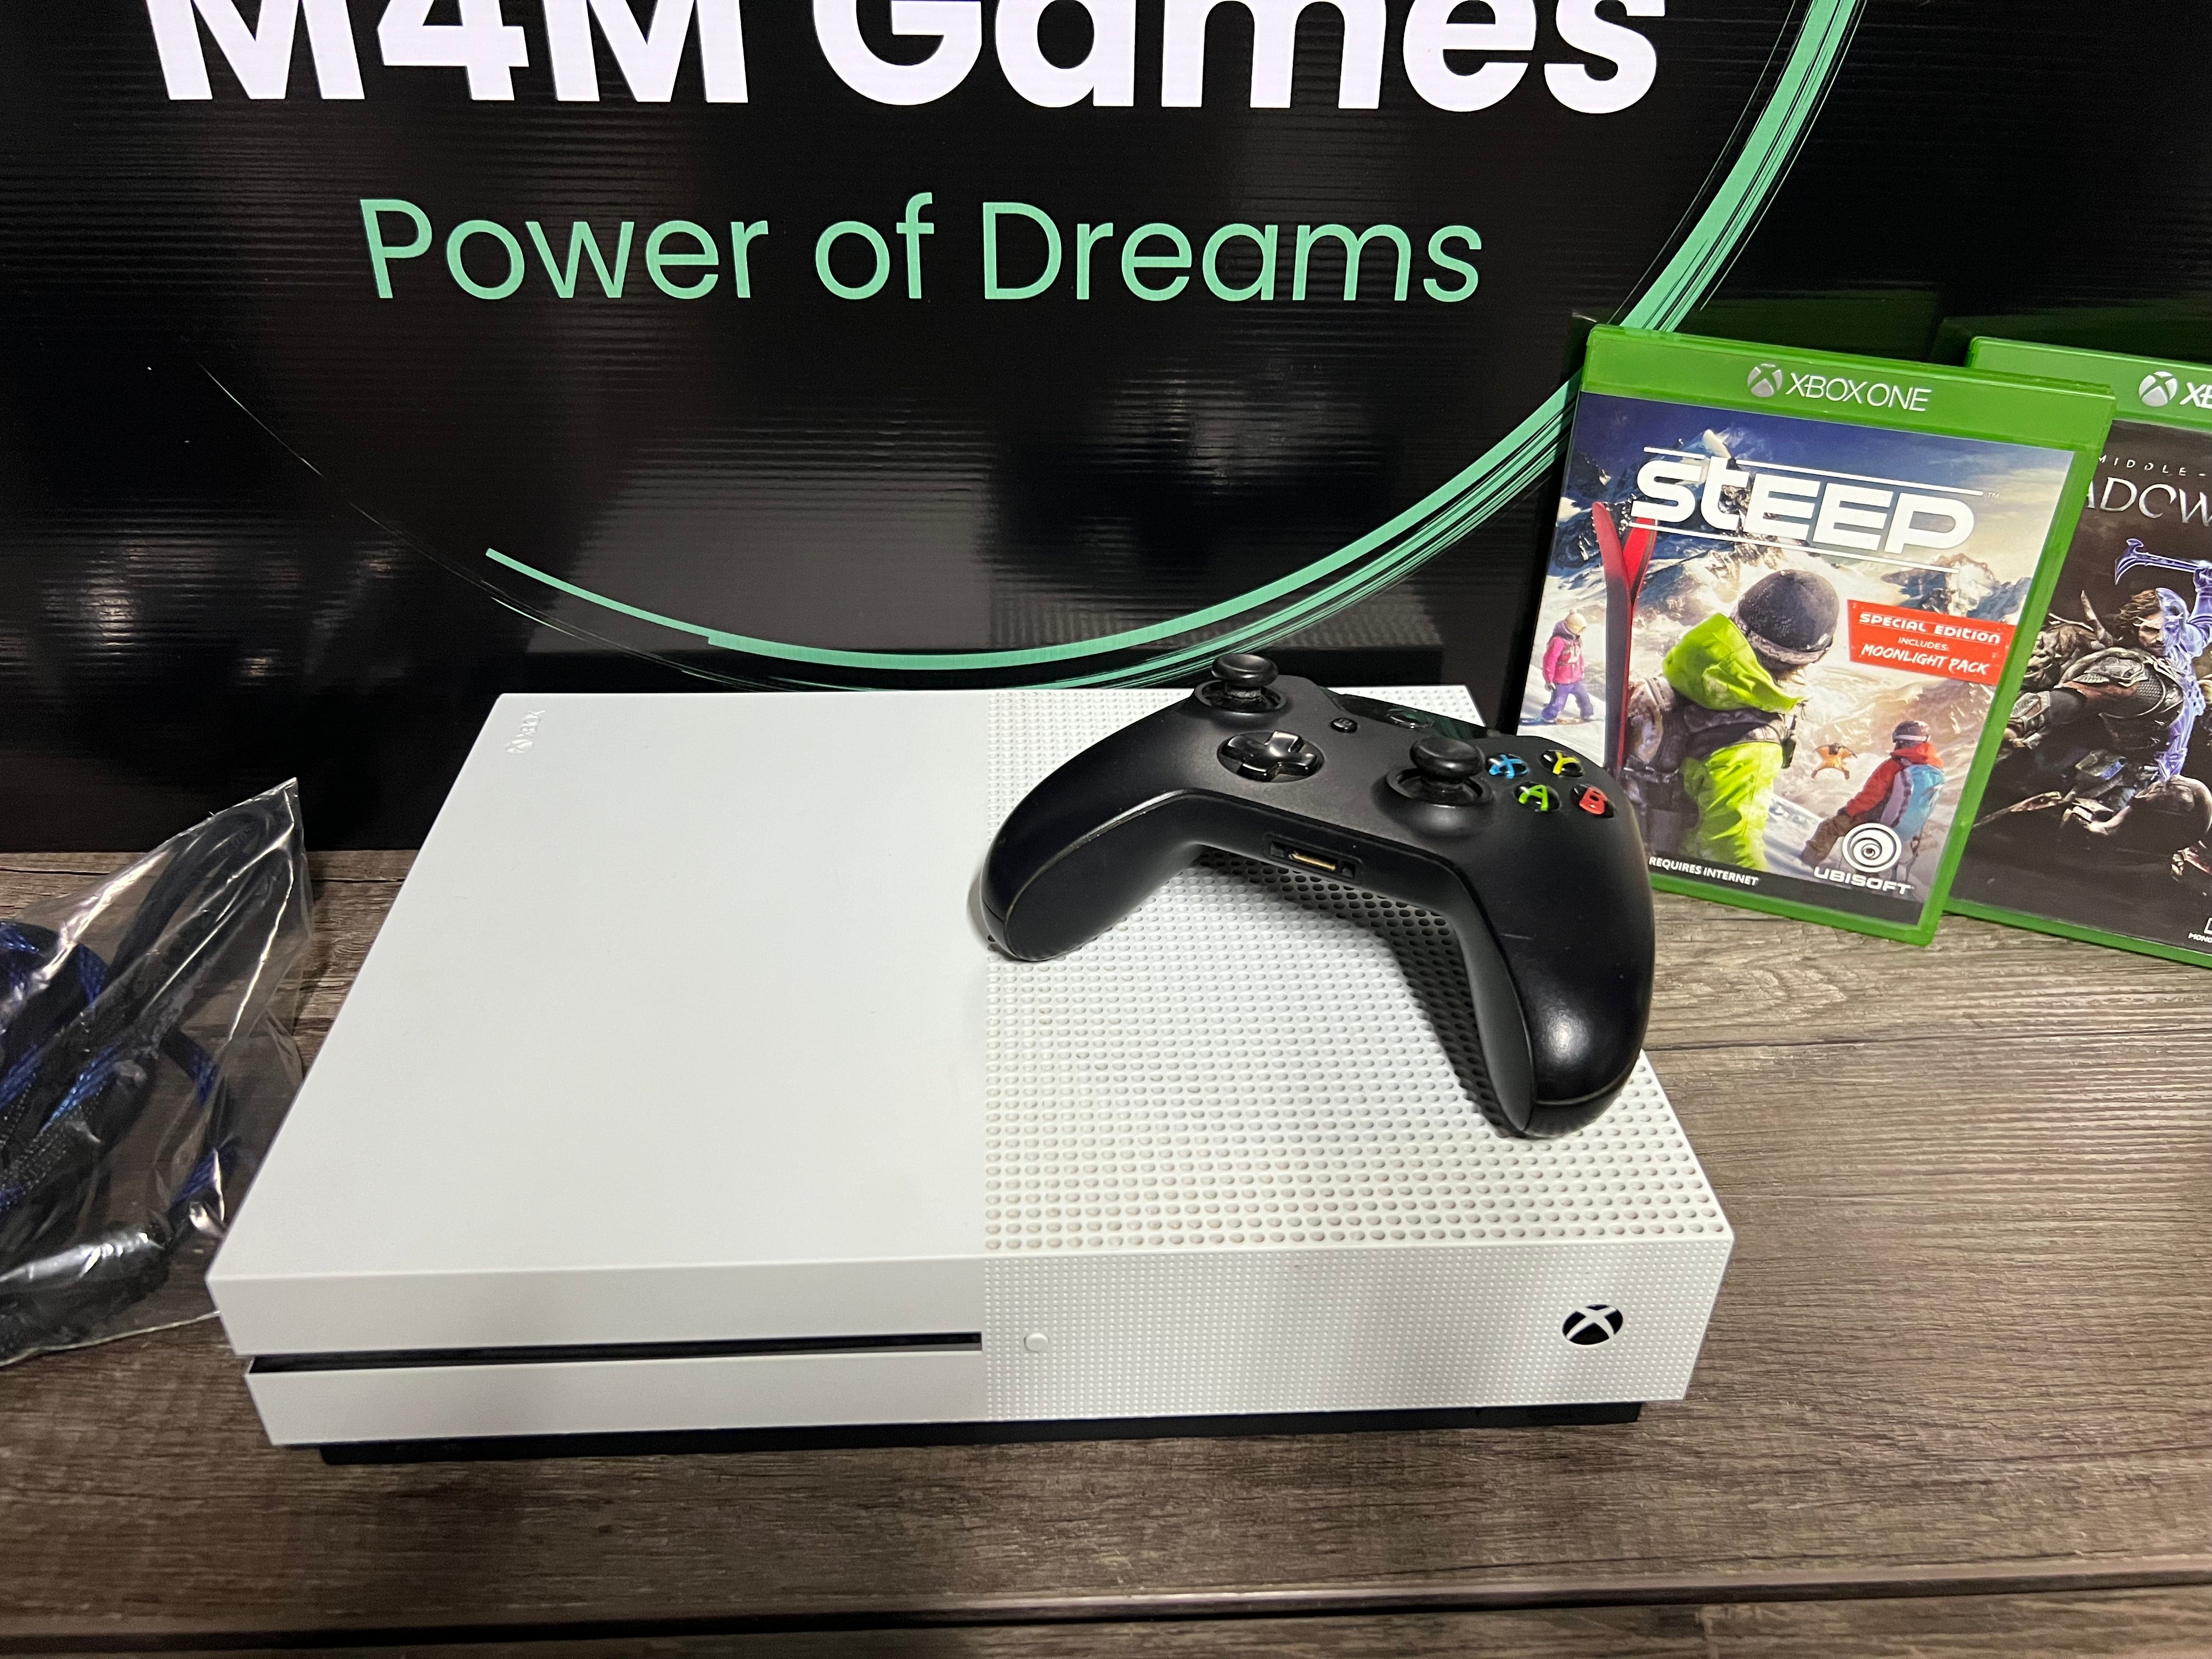 Xbox one S (Storage: 500GB) + 1 Controller + 2 Games – M4M Games